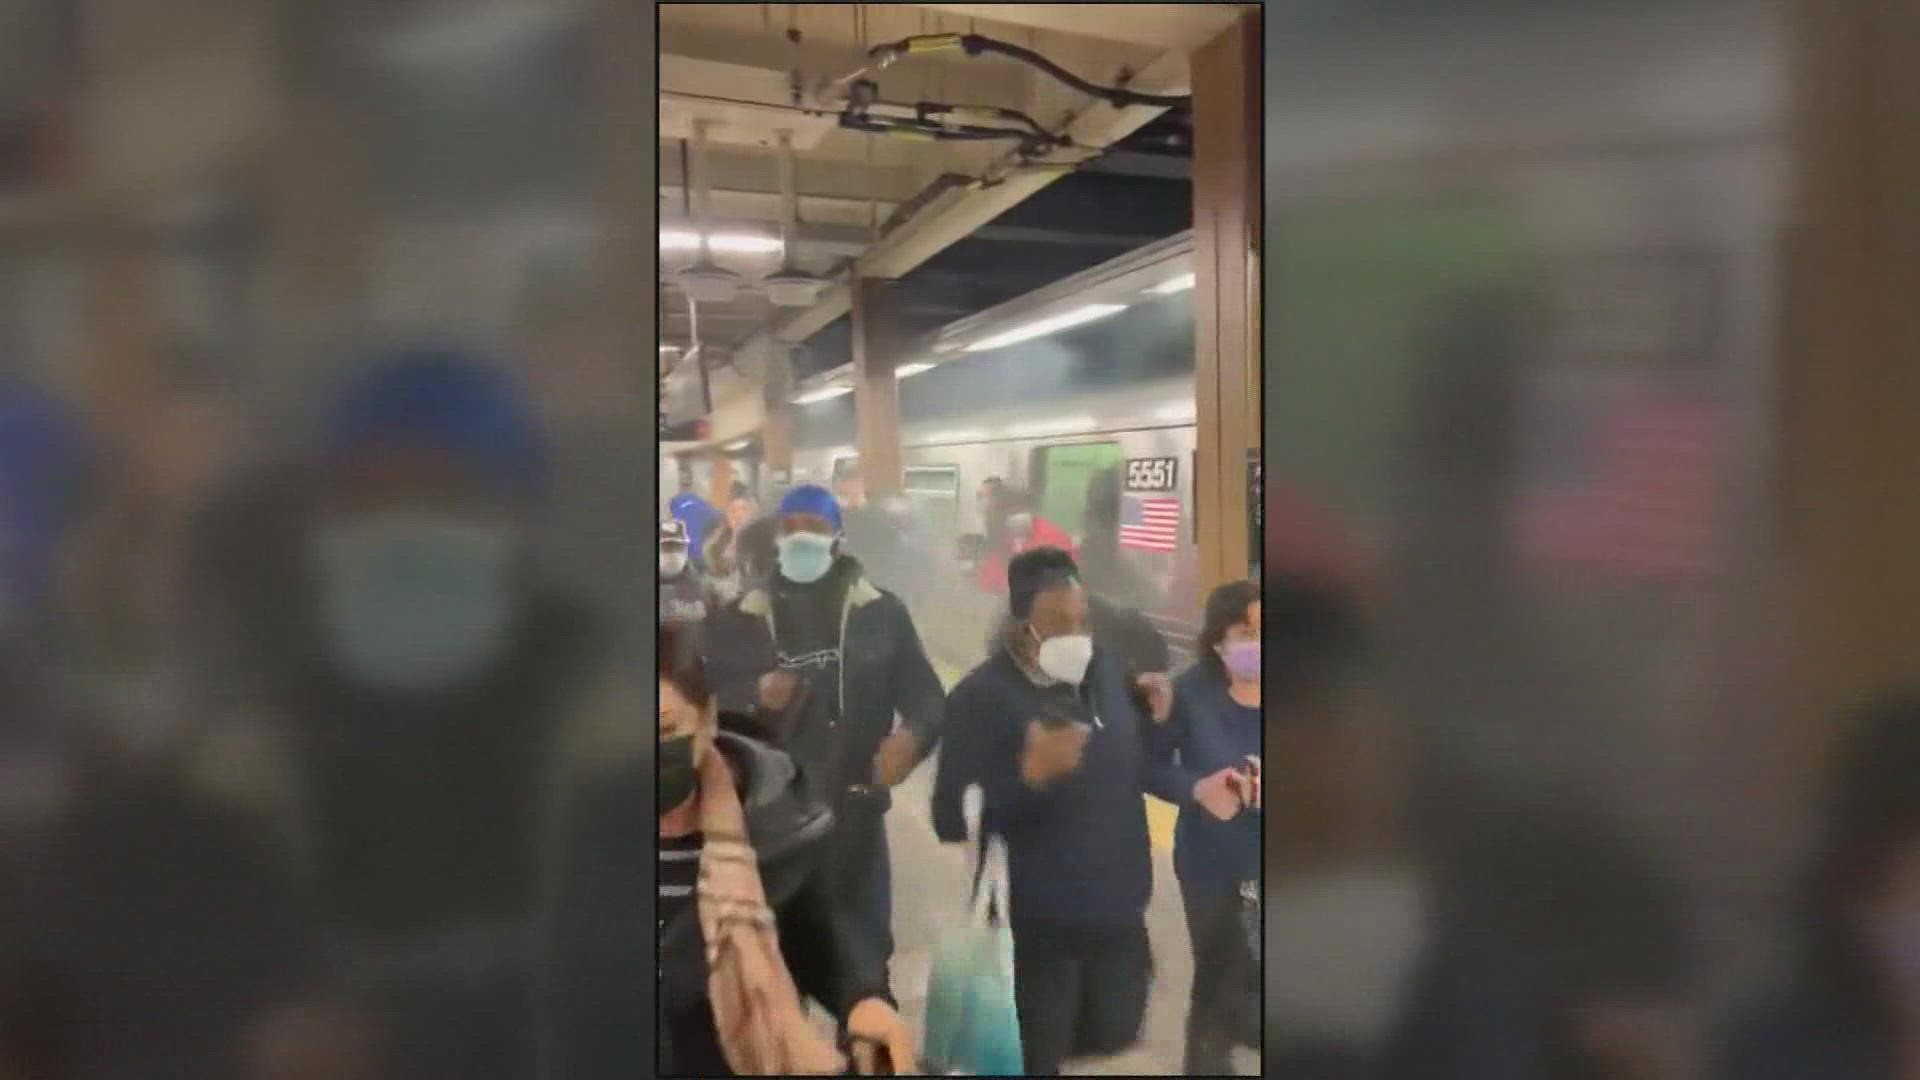 Police say someone fired at least 33 bullets in a rush-hour subway train, shooting at least 10 people Tuesday in Brooklyn.